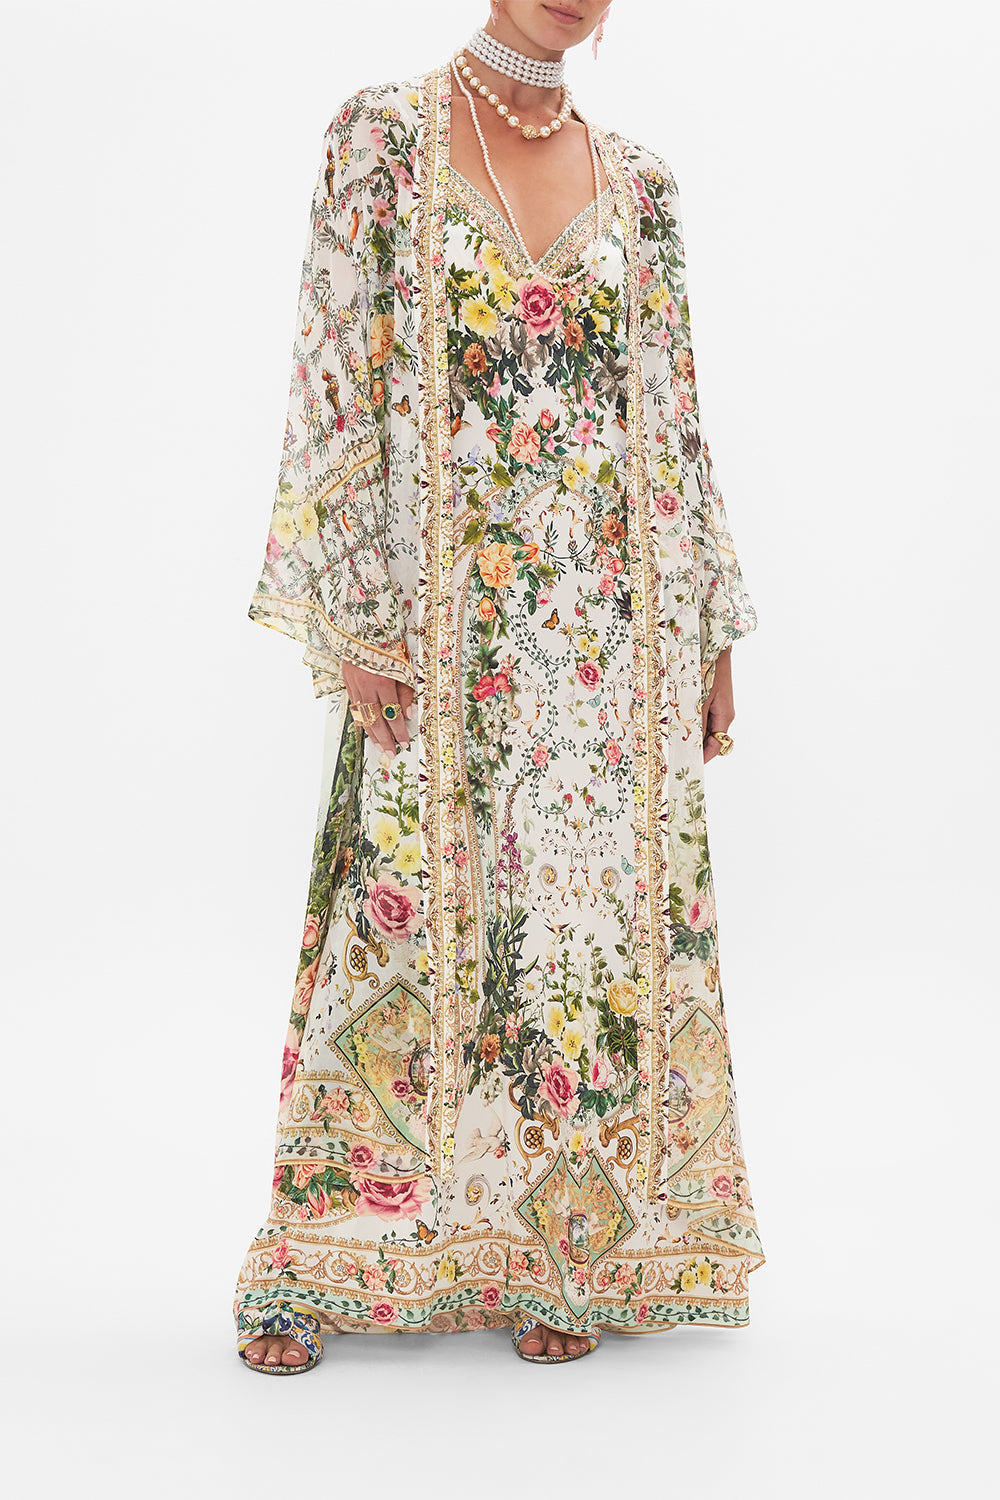 Front view of model wearing CAMILLA silk robe in Renaissance Romance print